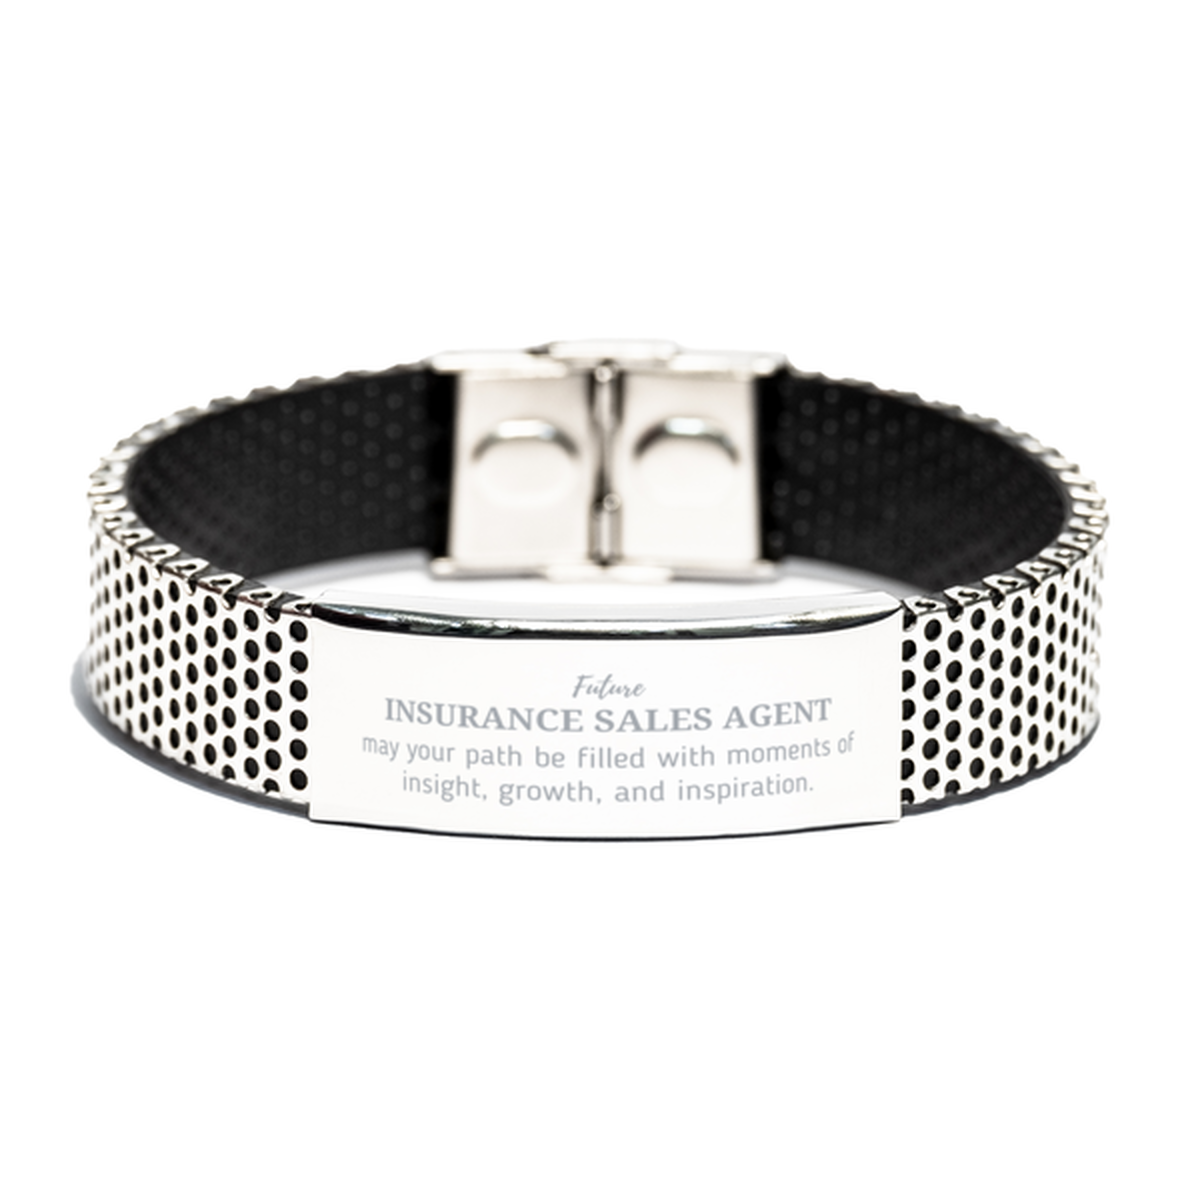 Future Insurance Sales Agent Gifts, May your path be filled with moments of insight, Graduation Gifts for New Insurance Sales Agent, Christmas Unique Stainless Steel Bracelet For Men, Women, Friends